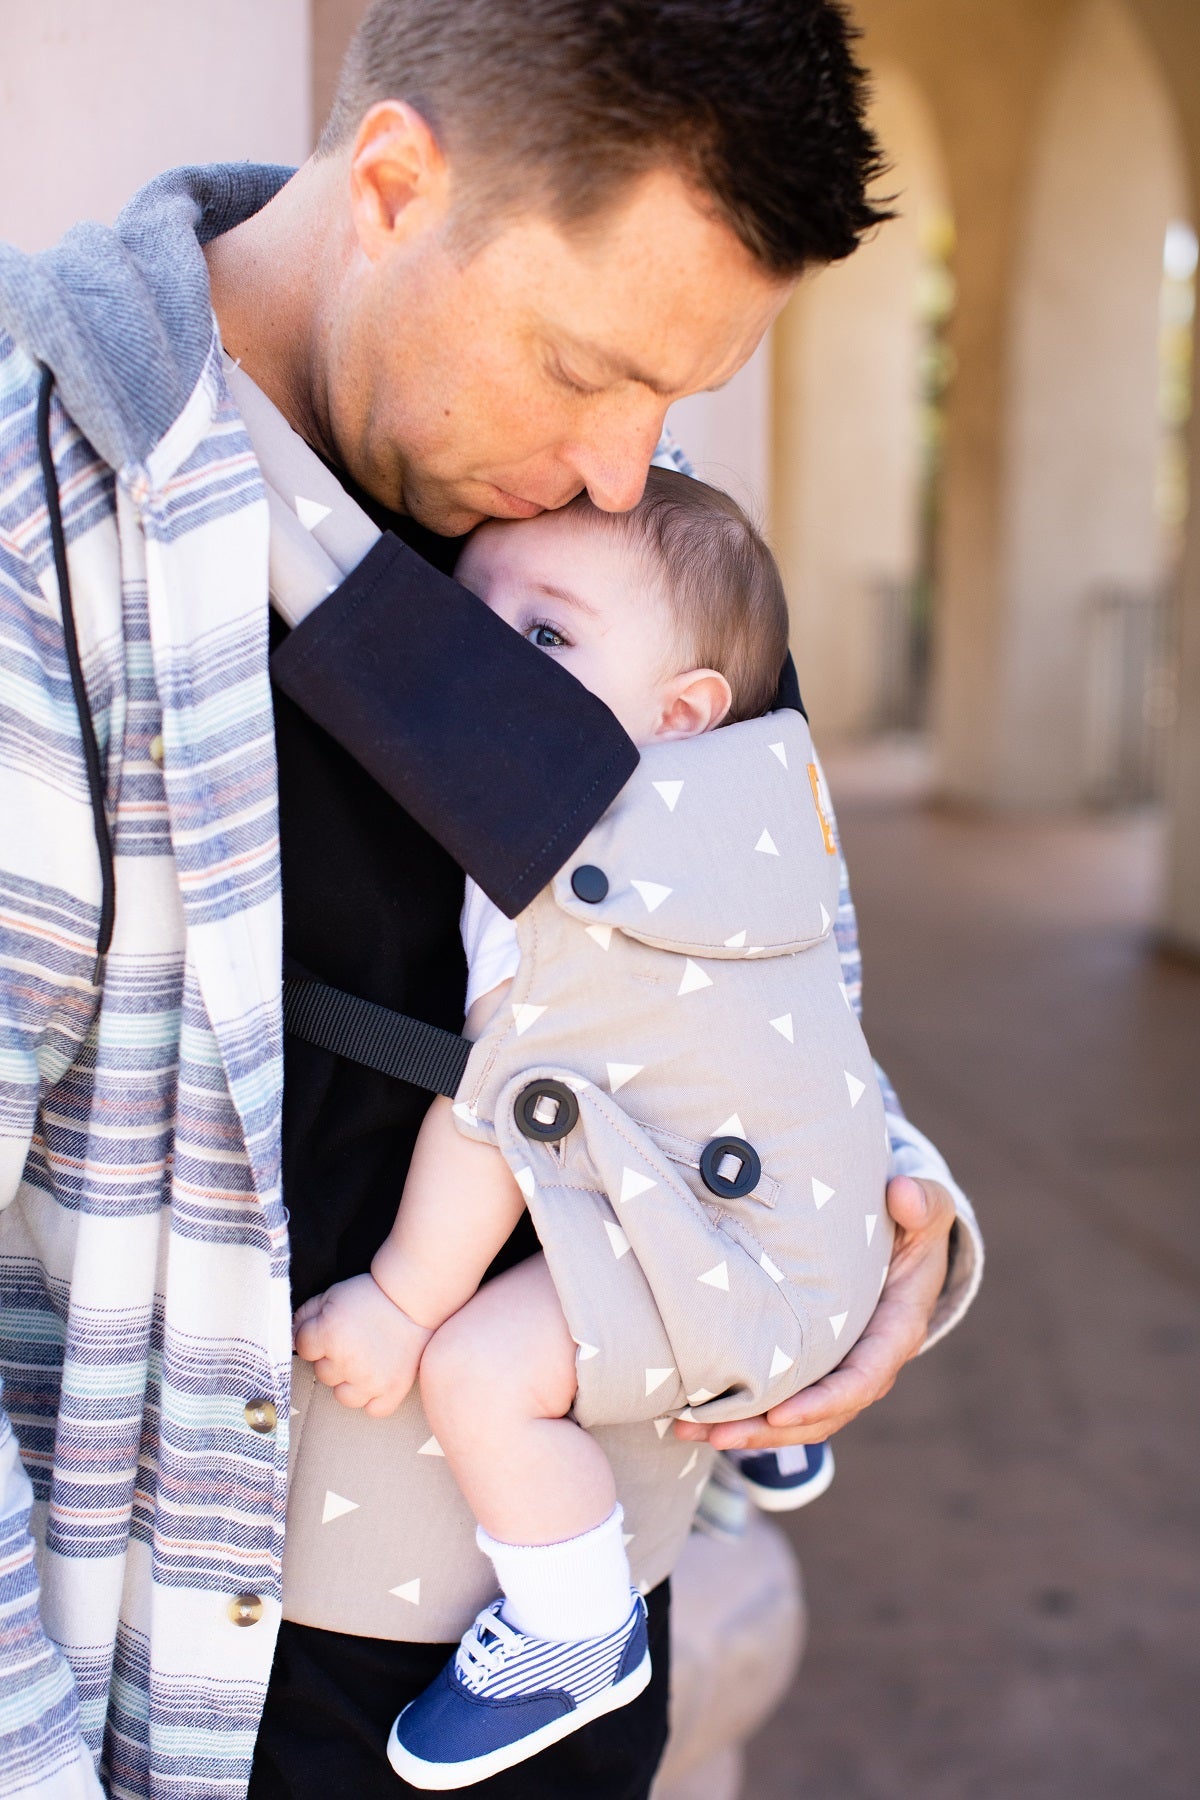 The Droola Strap Covers Urbanista from Tula in black on a Tula Baby Carrier.